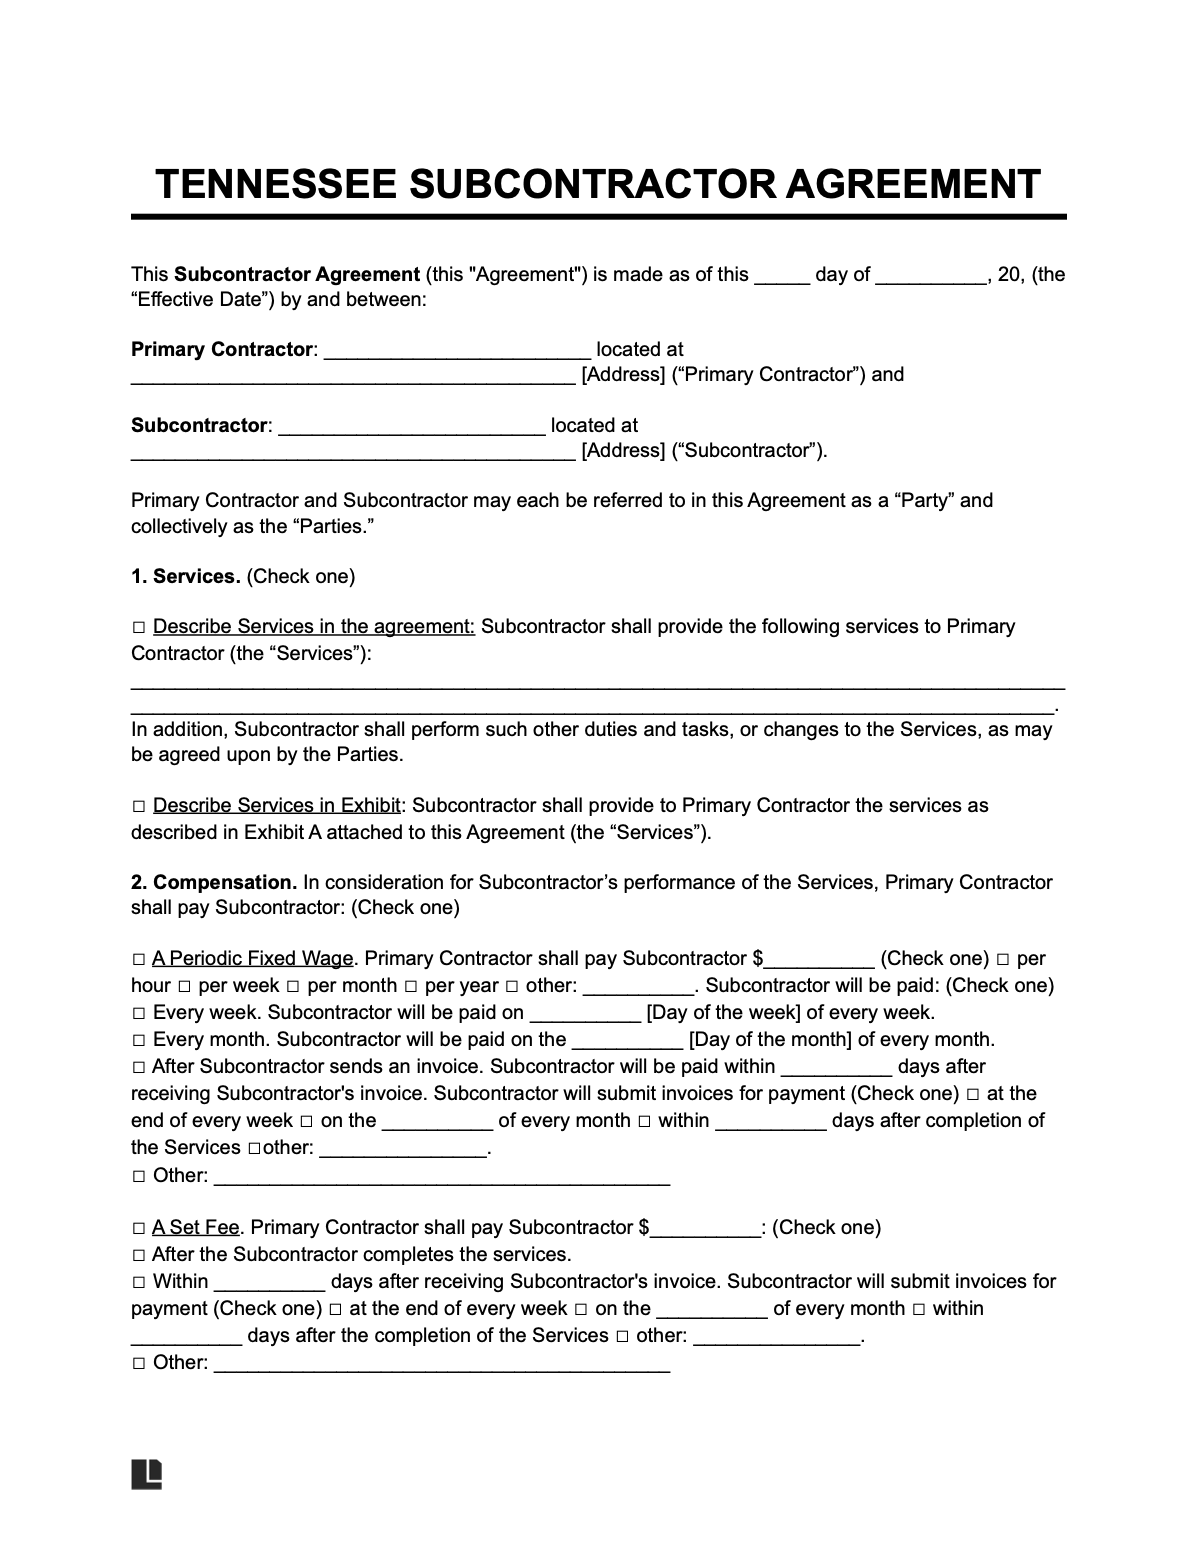 tennessee subcontractor agreement template